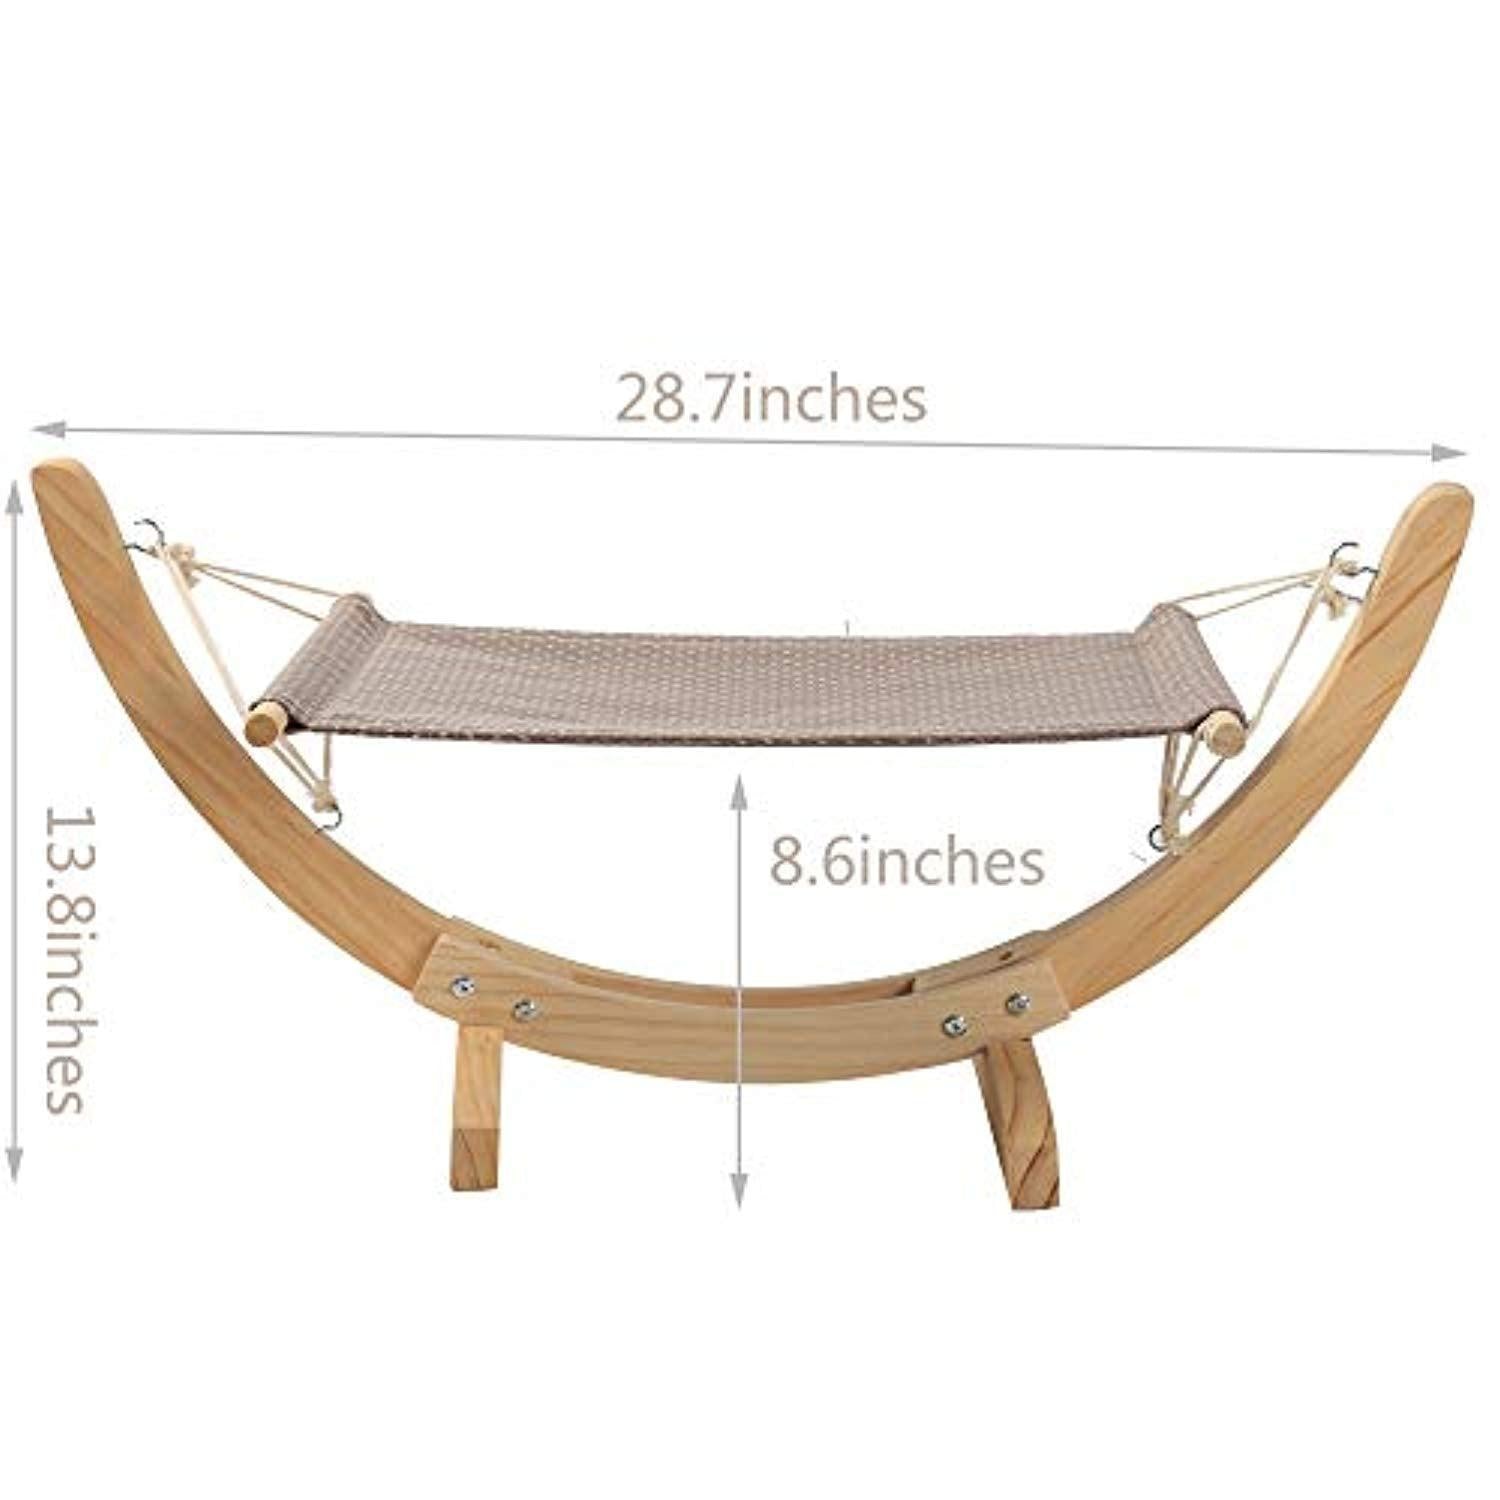 Bosonshop Cat Hammock Bed Wood Comfortable Hanging Lounger for Cats and Small Dogs